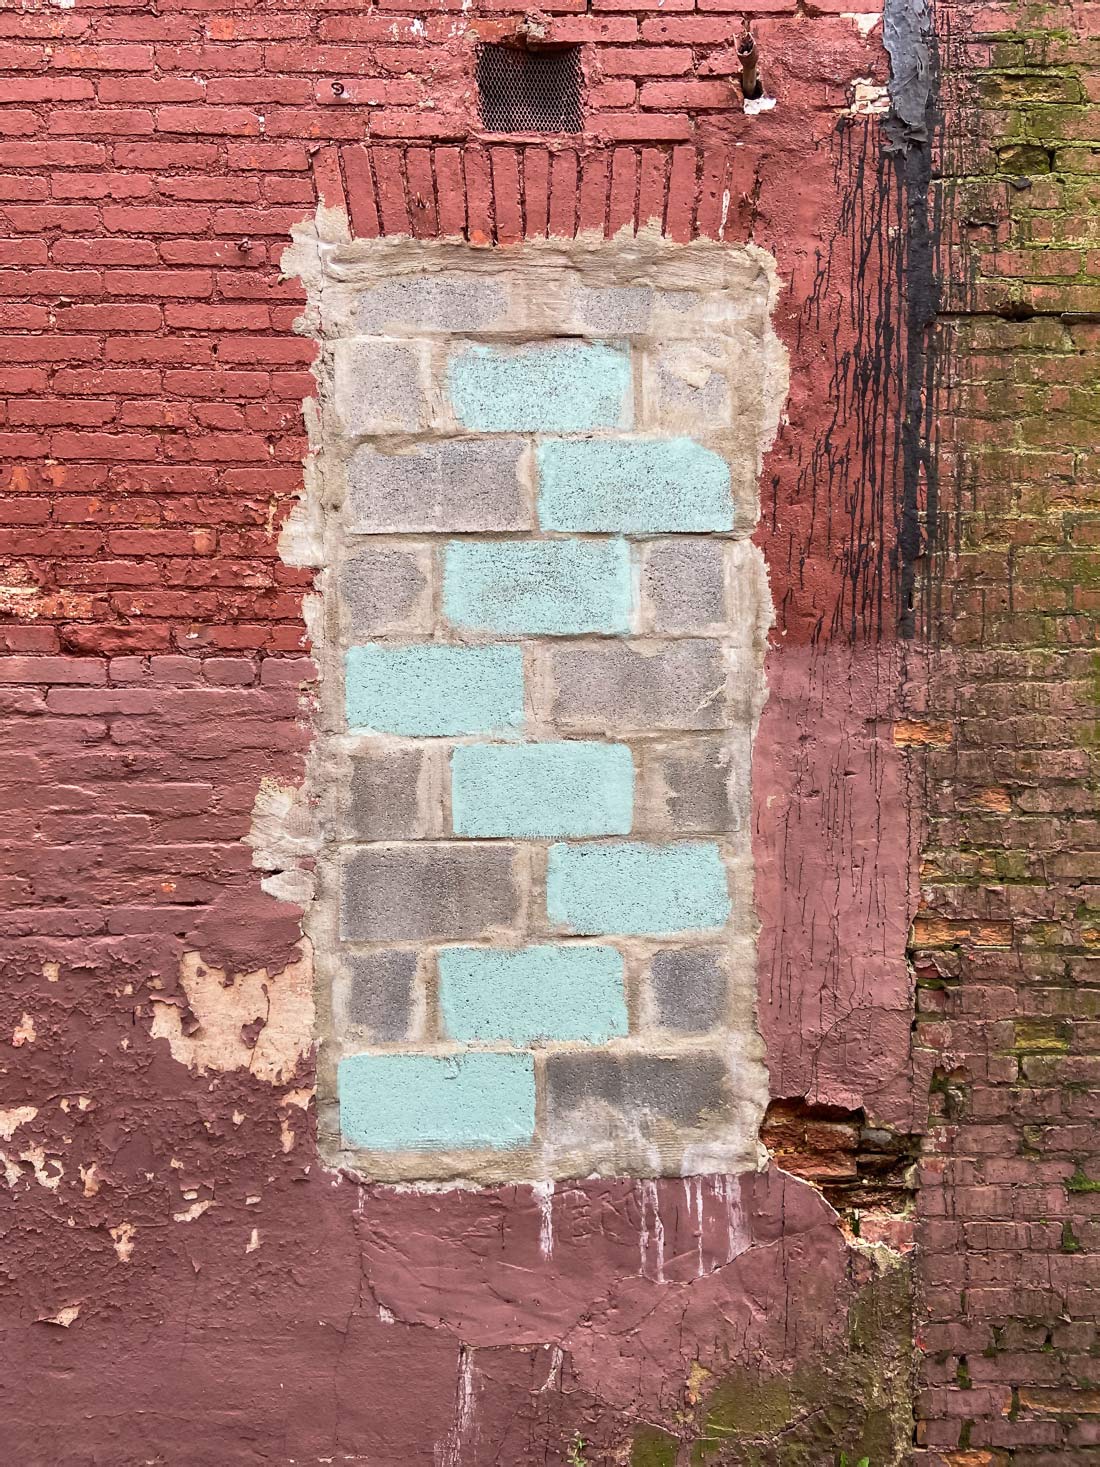 Fine art photo of a bricked up window or door permanently sealed with bricks © Bruce Willen